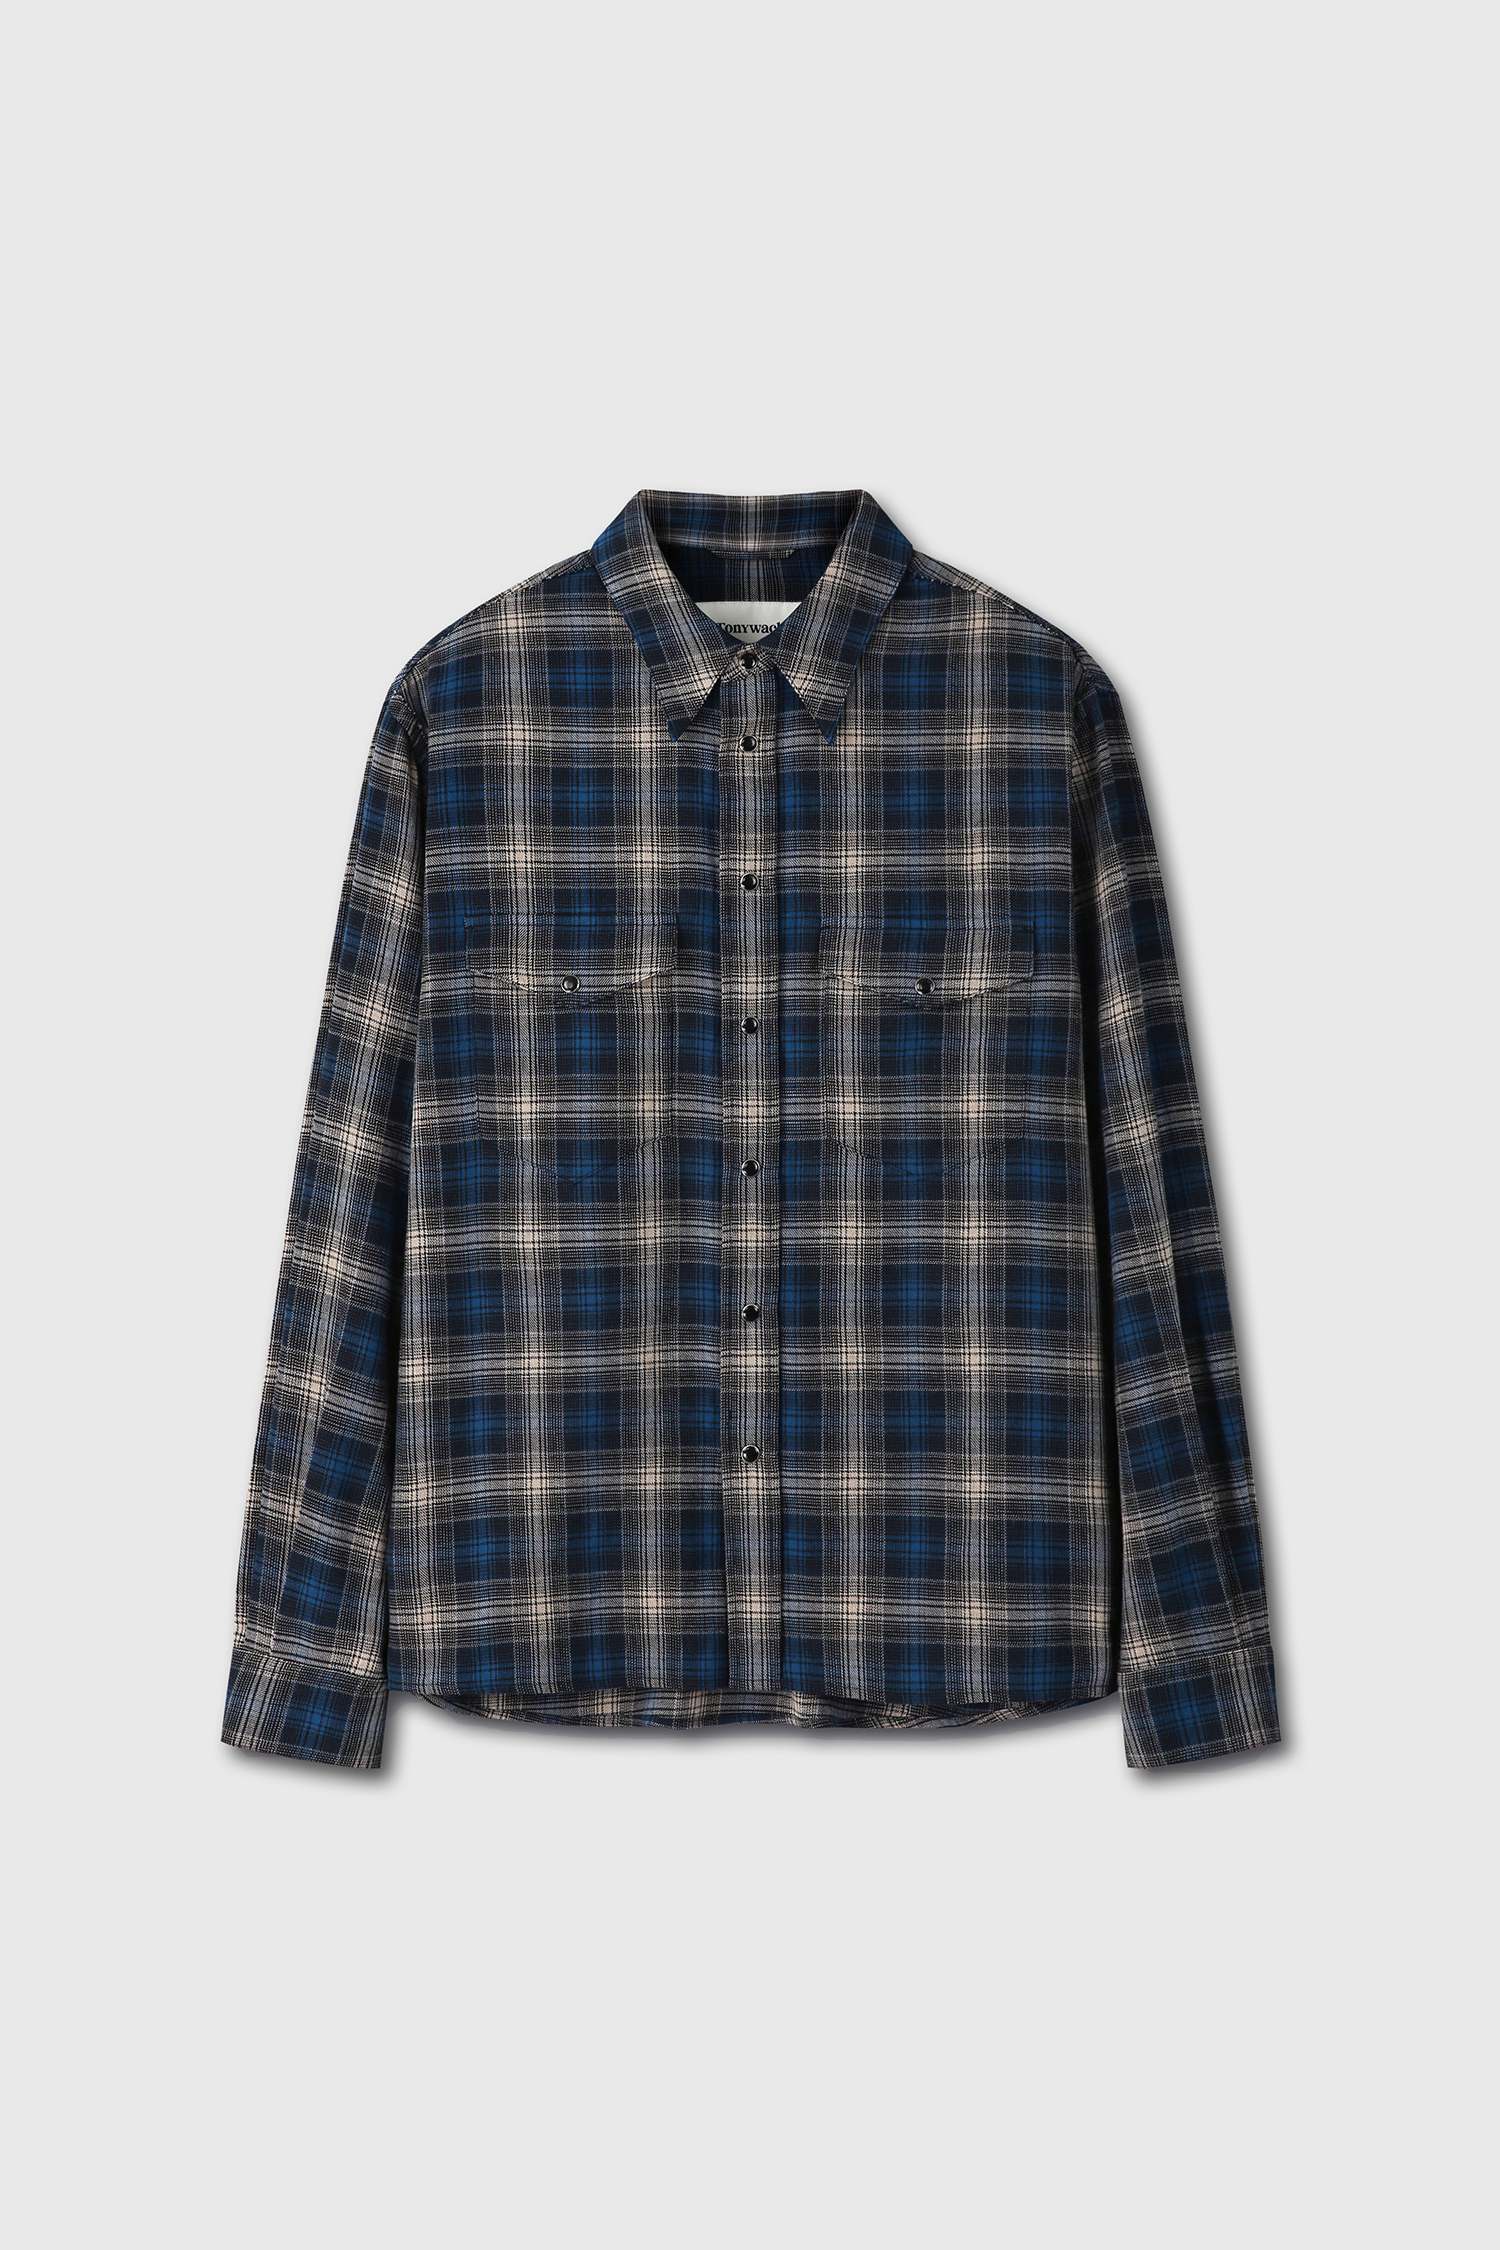 BRUSHED COTTON DOUBLE POCKET CHECK SHIRT navy blue